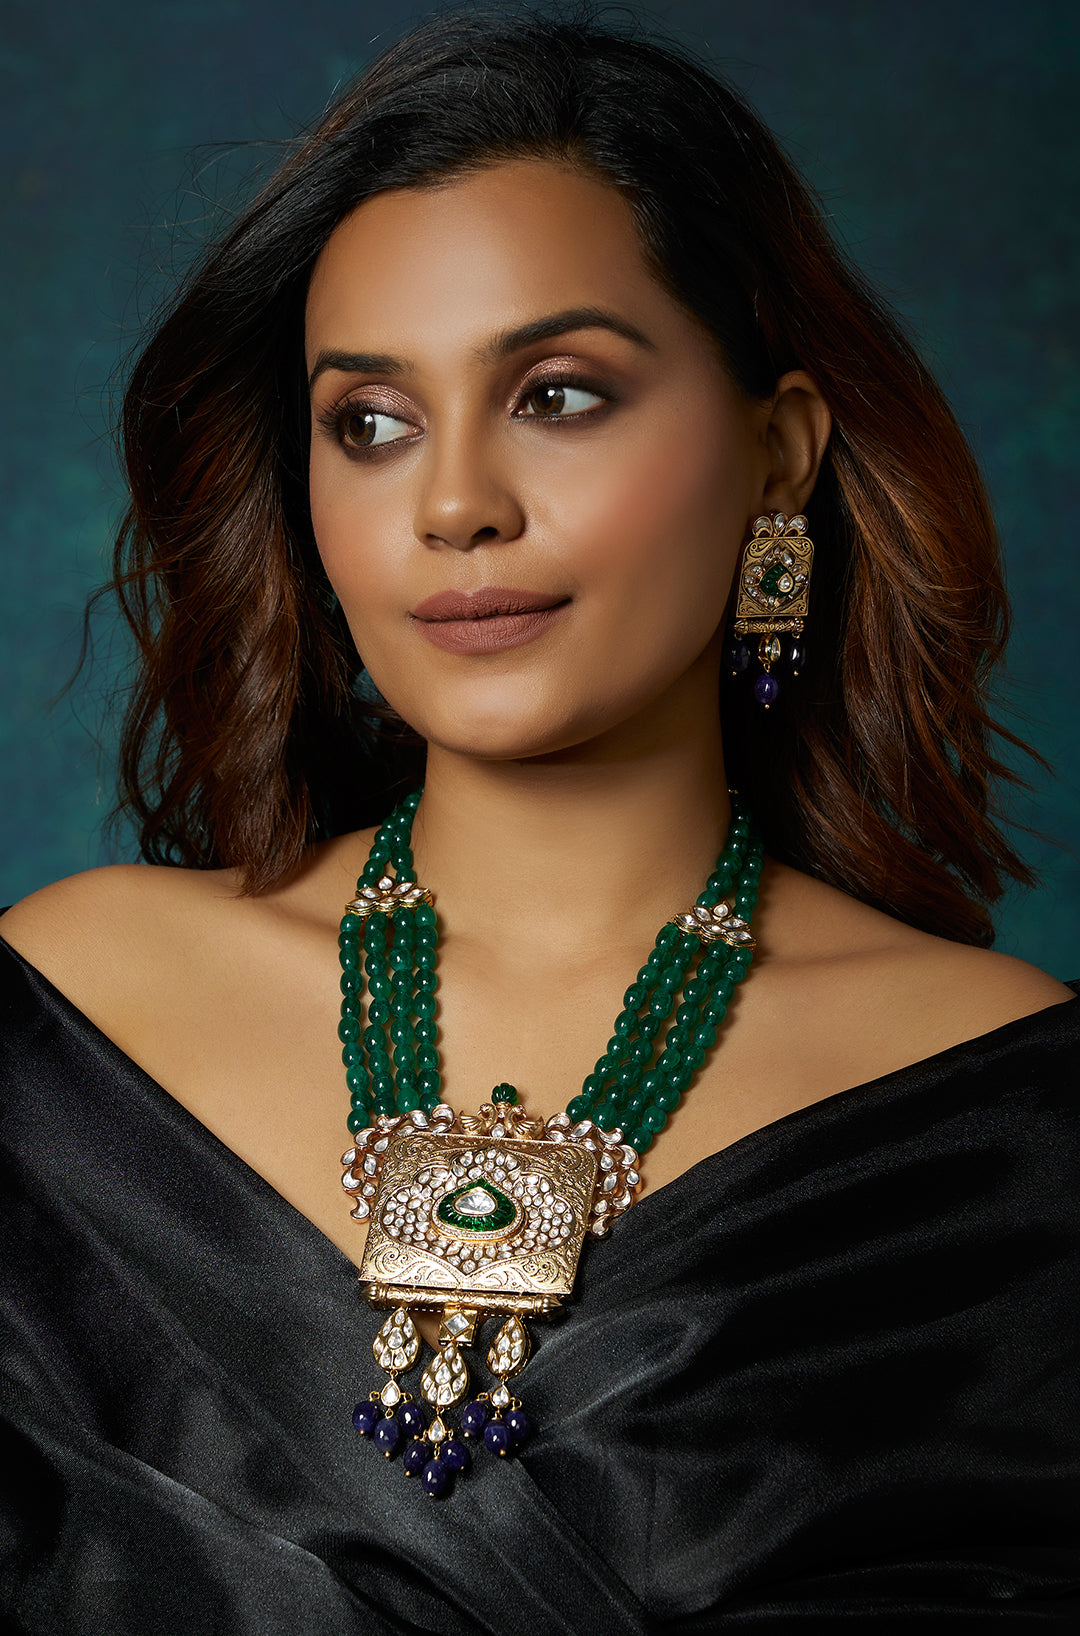 Load image into Gallery viewer, Kundan Polki Green Vintage Necklace Set - Joules by Radhika
